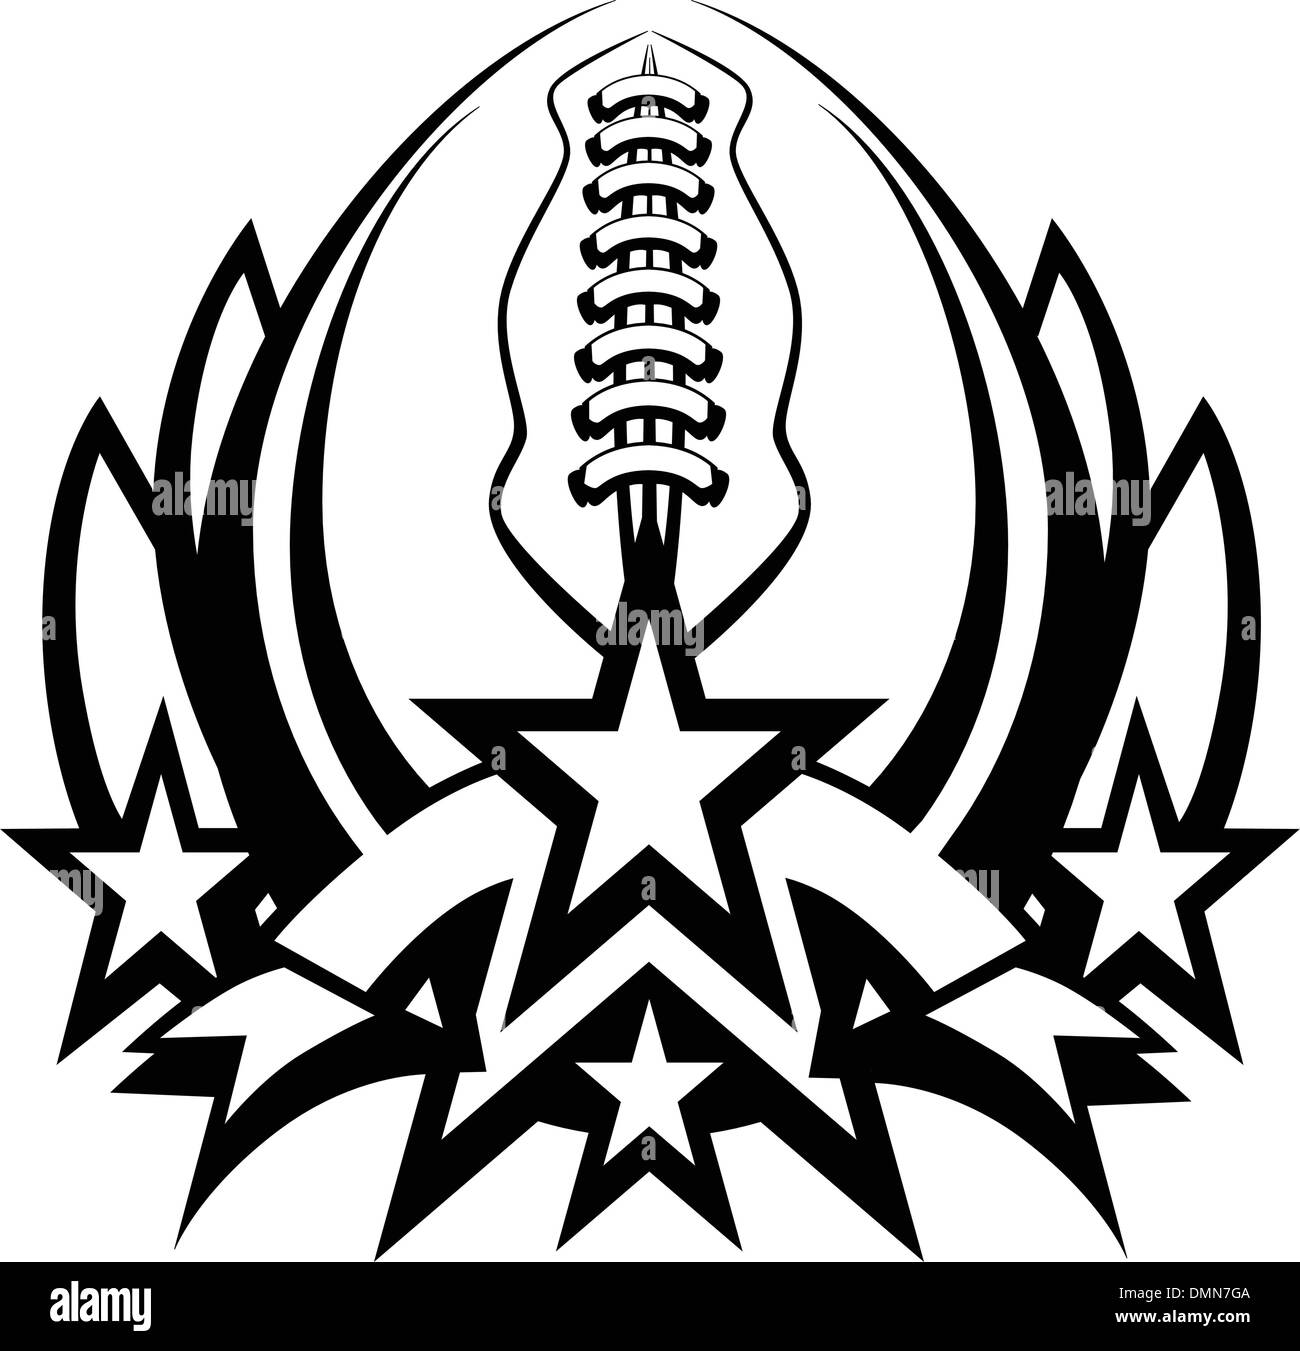 Football Vector Graphic Template with Stars Stock Vector